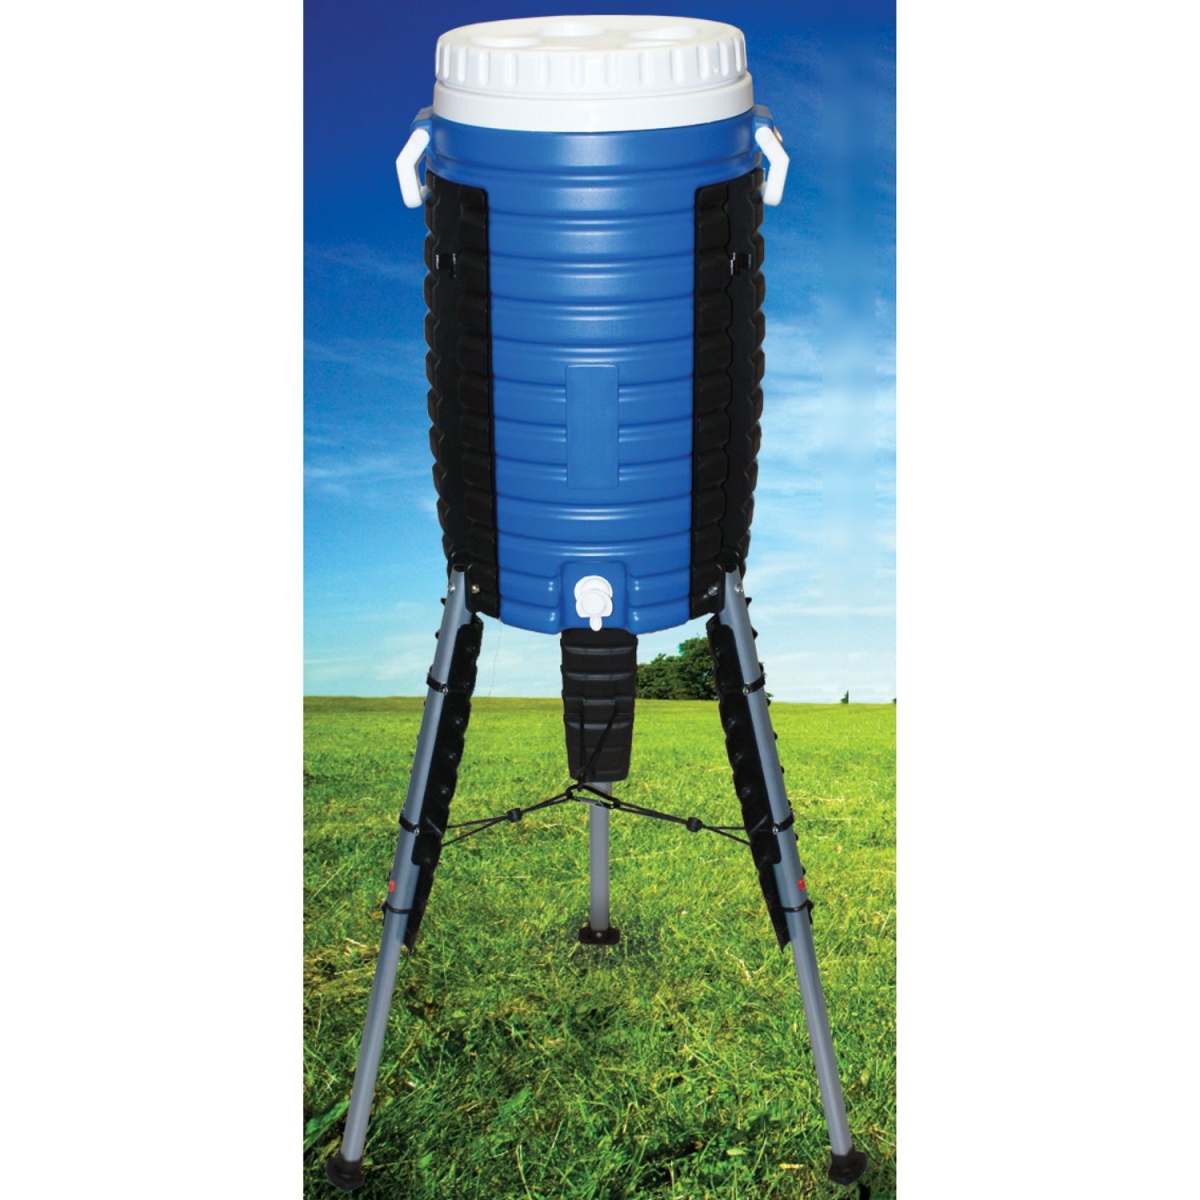 Br549 5 Gal Blue Insulate Cooler With Stand-up Legs - 22.5 X 13 In.